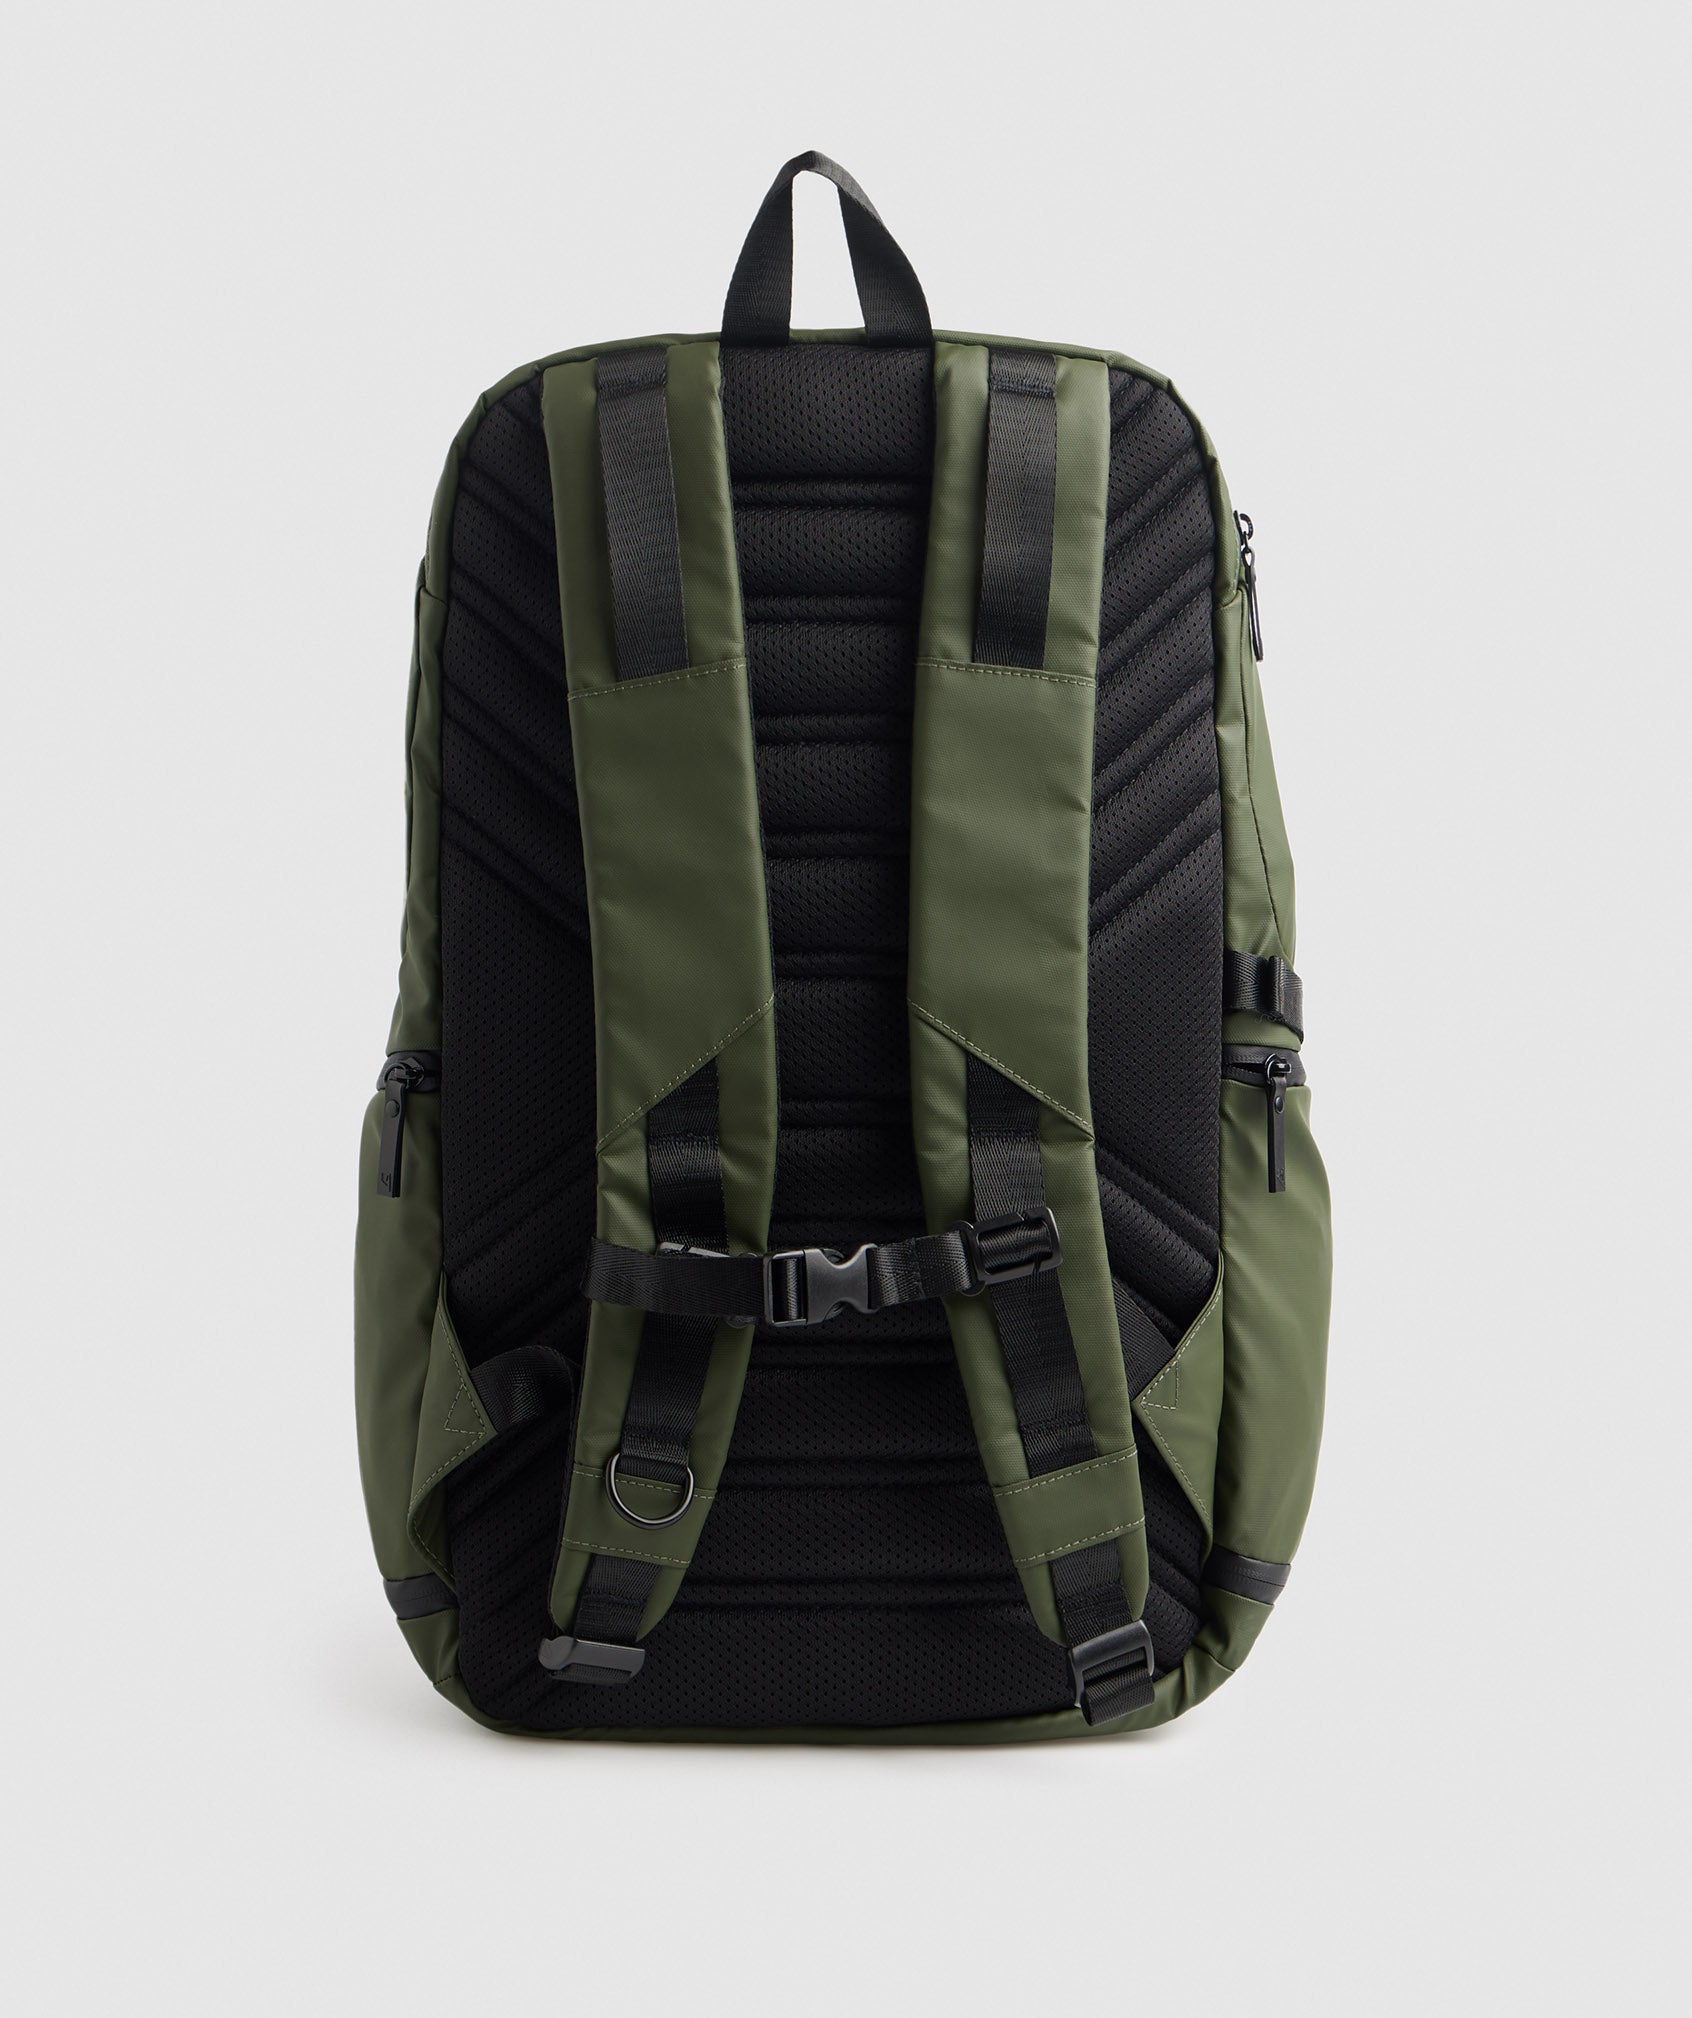 X-Series Bag 0.3 in Core Olive - view 4